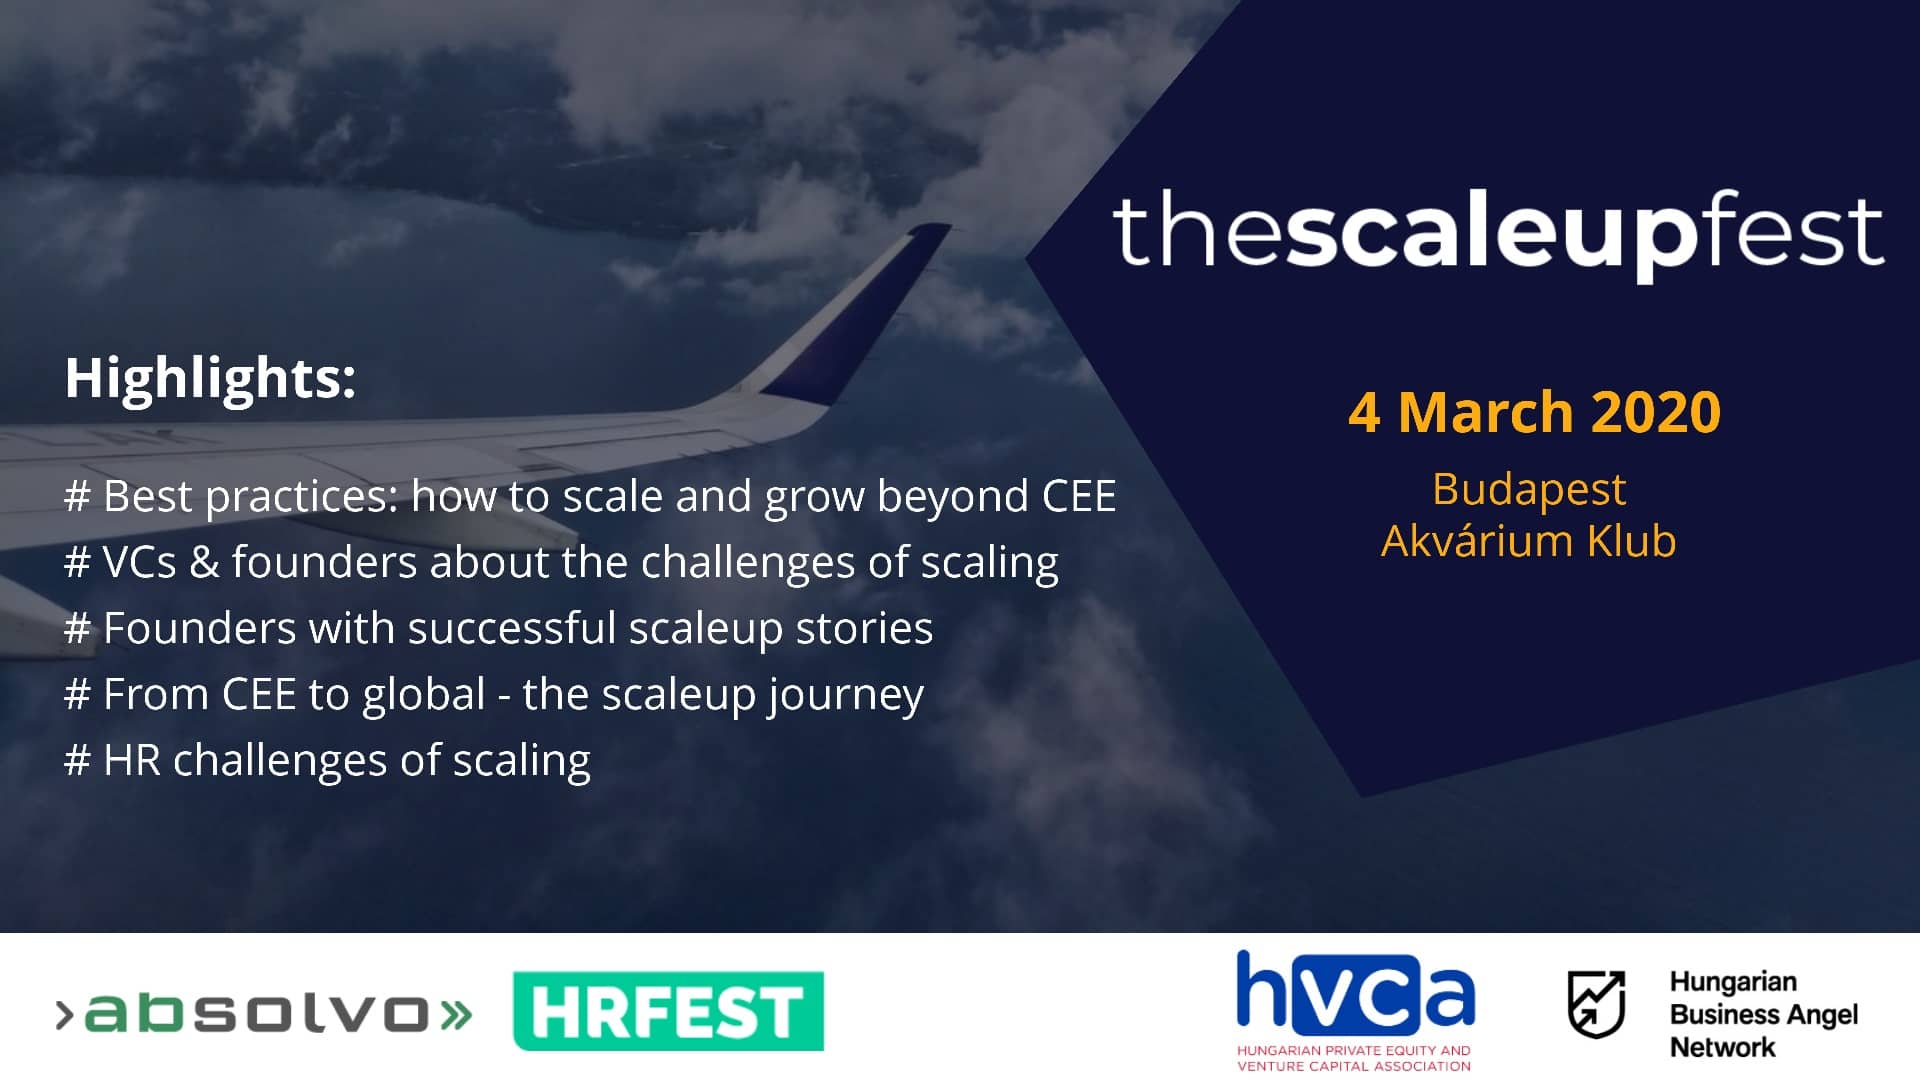 Key highlights of TheScaleupFest event - March 2020